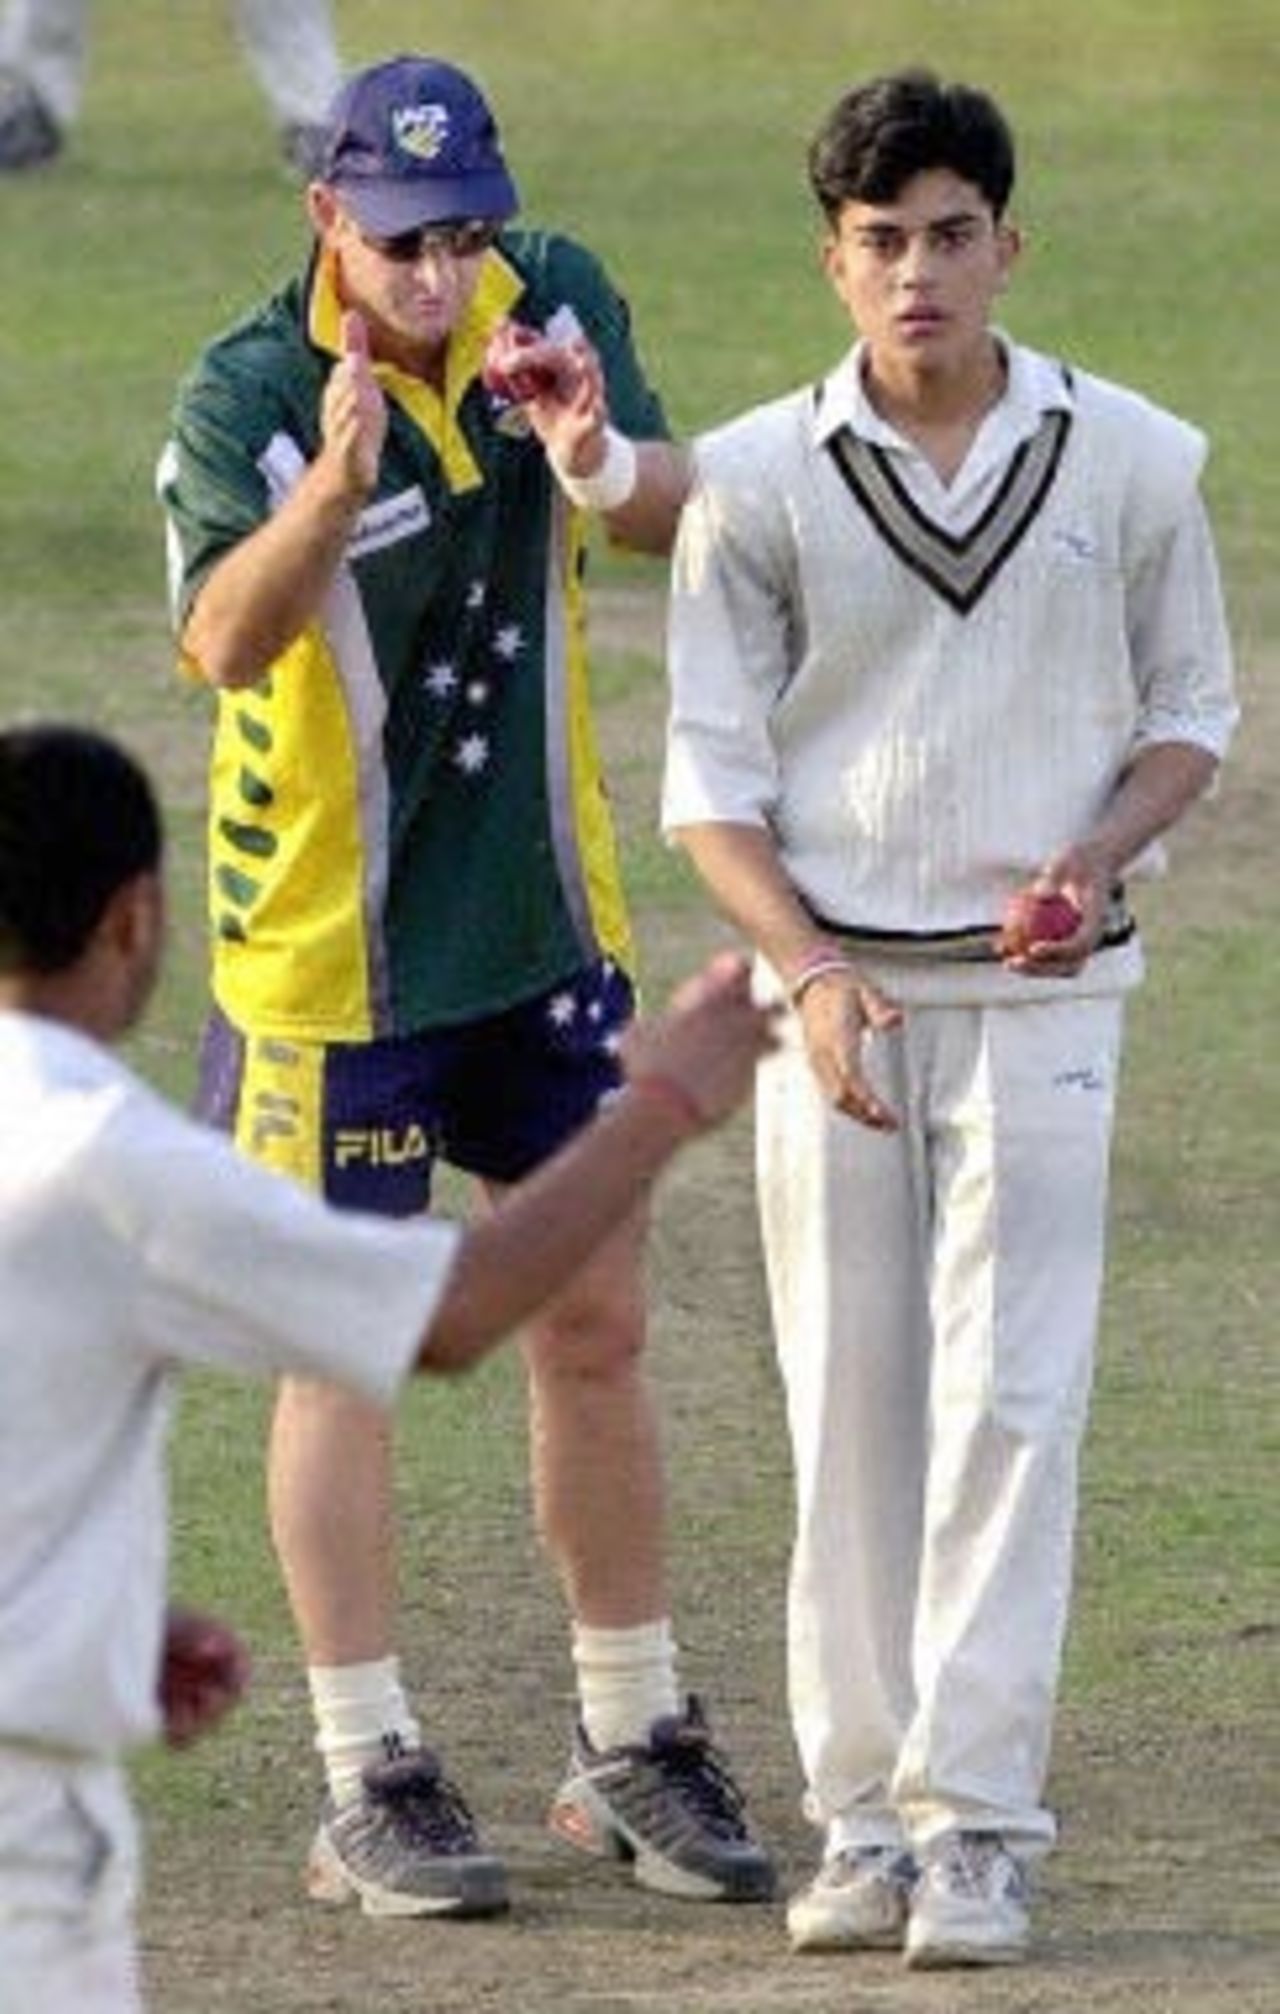 Australian star batsman Mark Waugh (C-green top) gives finer tips to a young Indian junior cricketer as he runs in to bowl during a net practice session by the Australian team at Ferozshah Kotla ground in New Delhi, 04 March 2001. Australia will be playing India's Board President's XI team from 06 March 2001 after having already taken a 1-0 lead in the three Test match series against India.